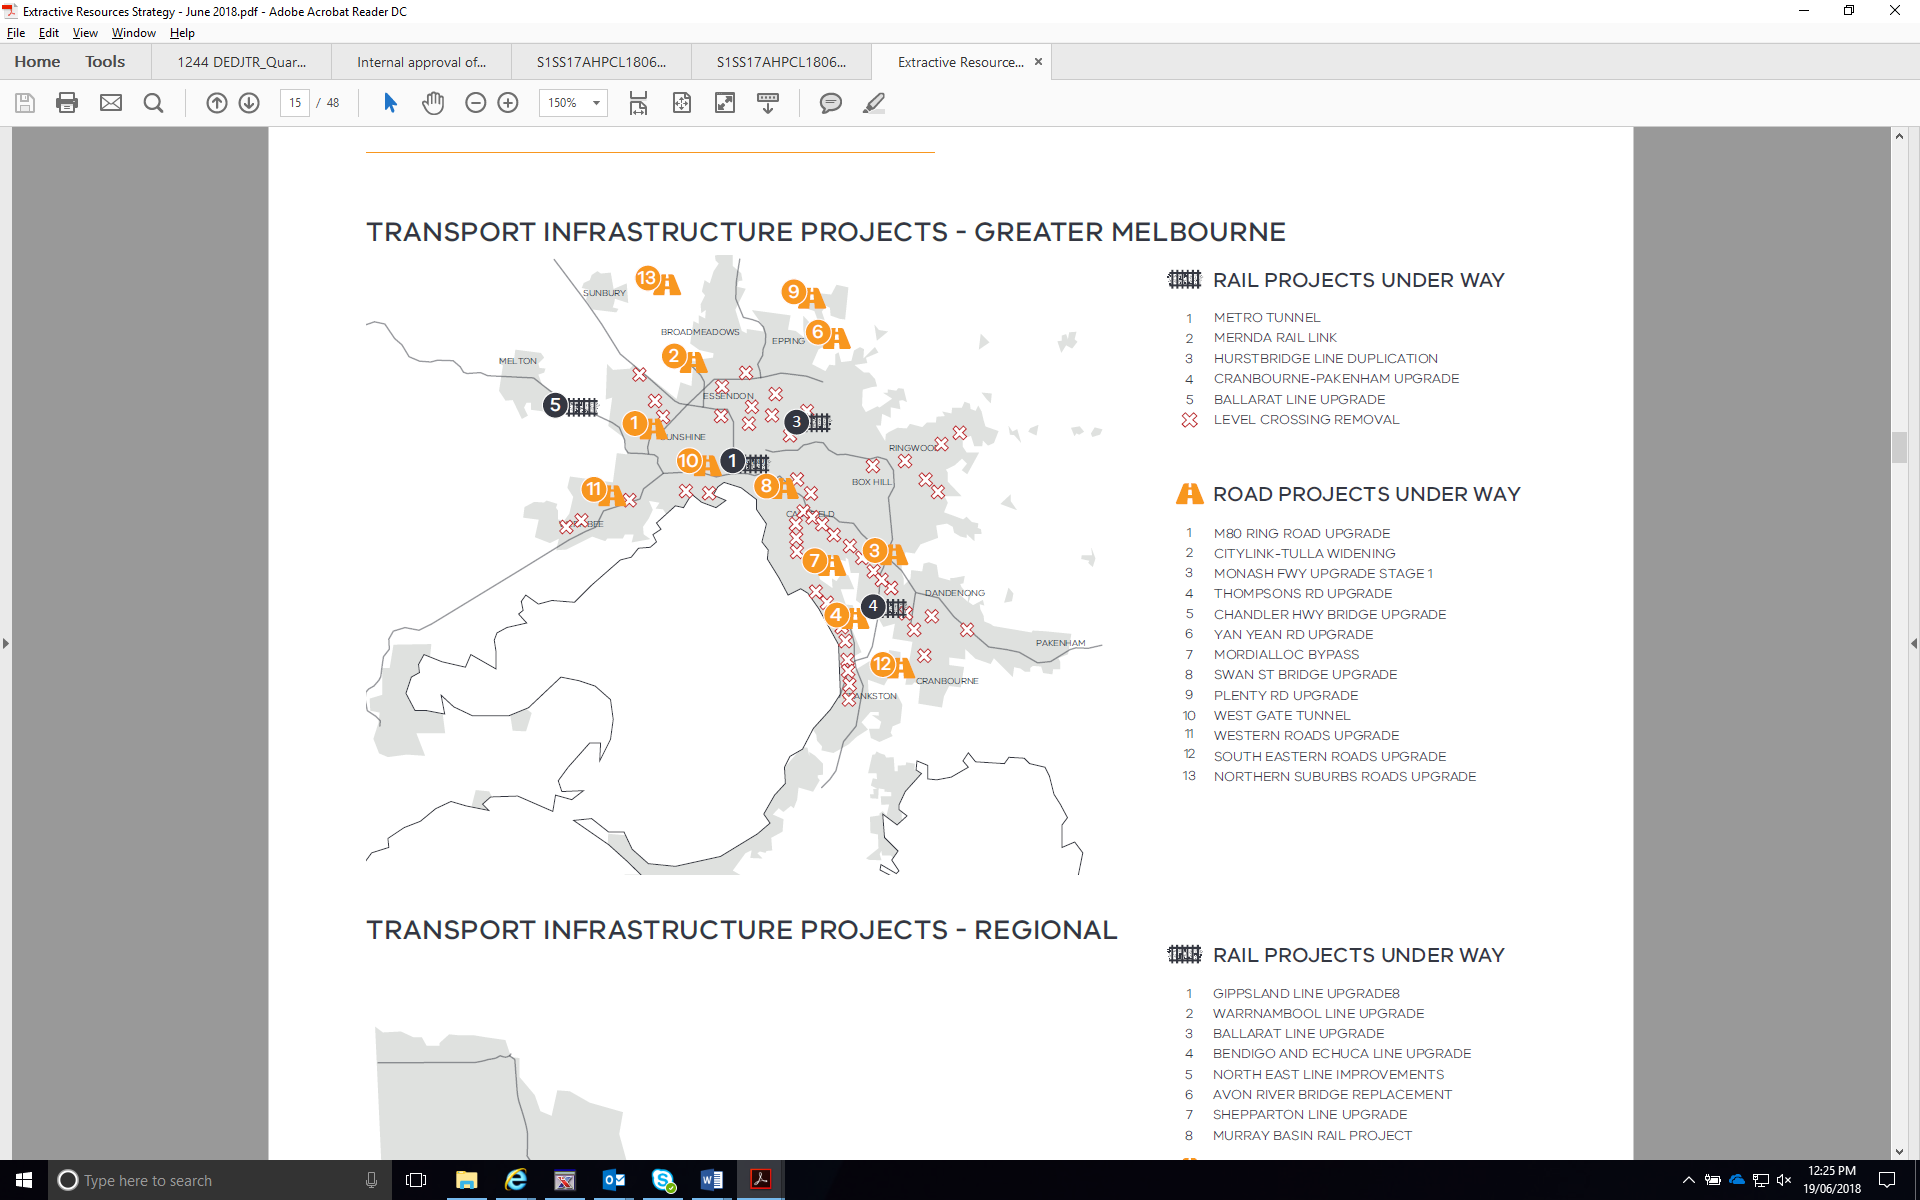 image is a map showing current transport infrastructure projects in greater melbourne. there are 5 rail projects underway, 50 level crossing projects, and 13 road projects underway across greater melbourne.